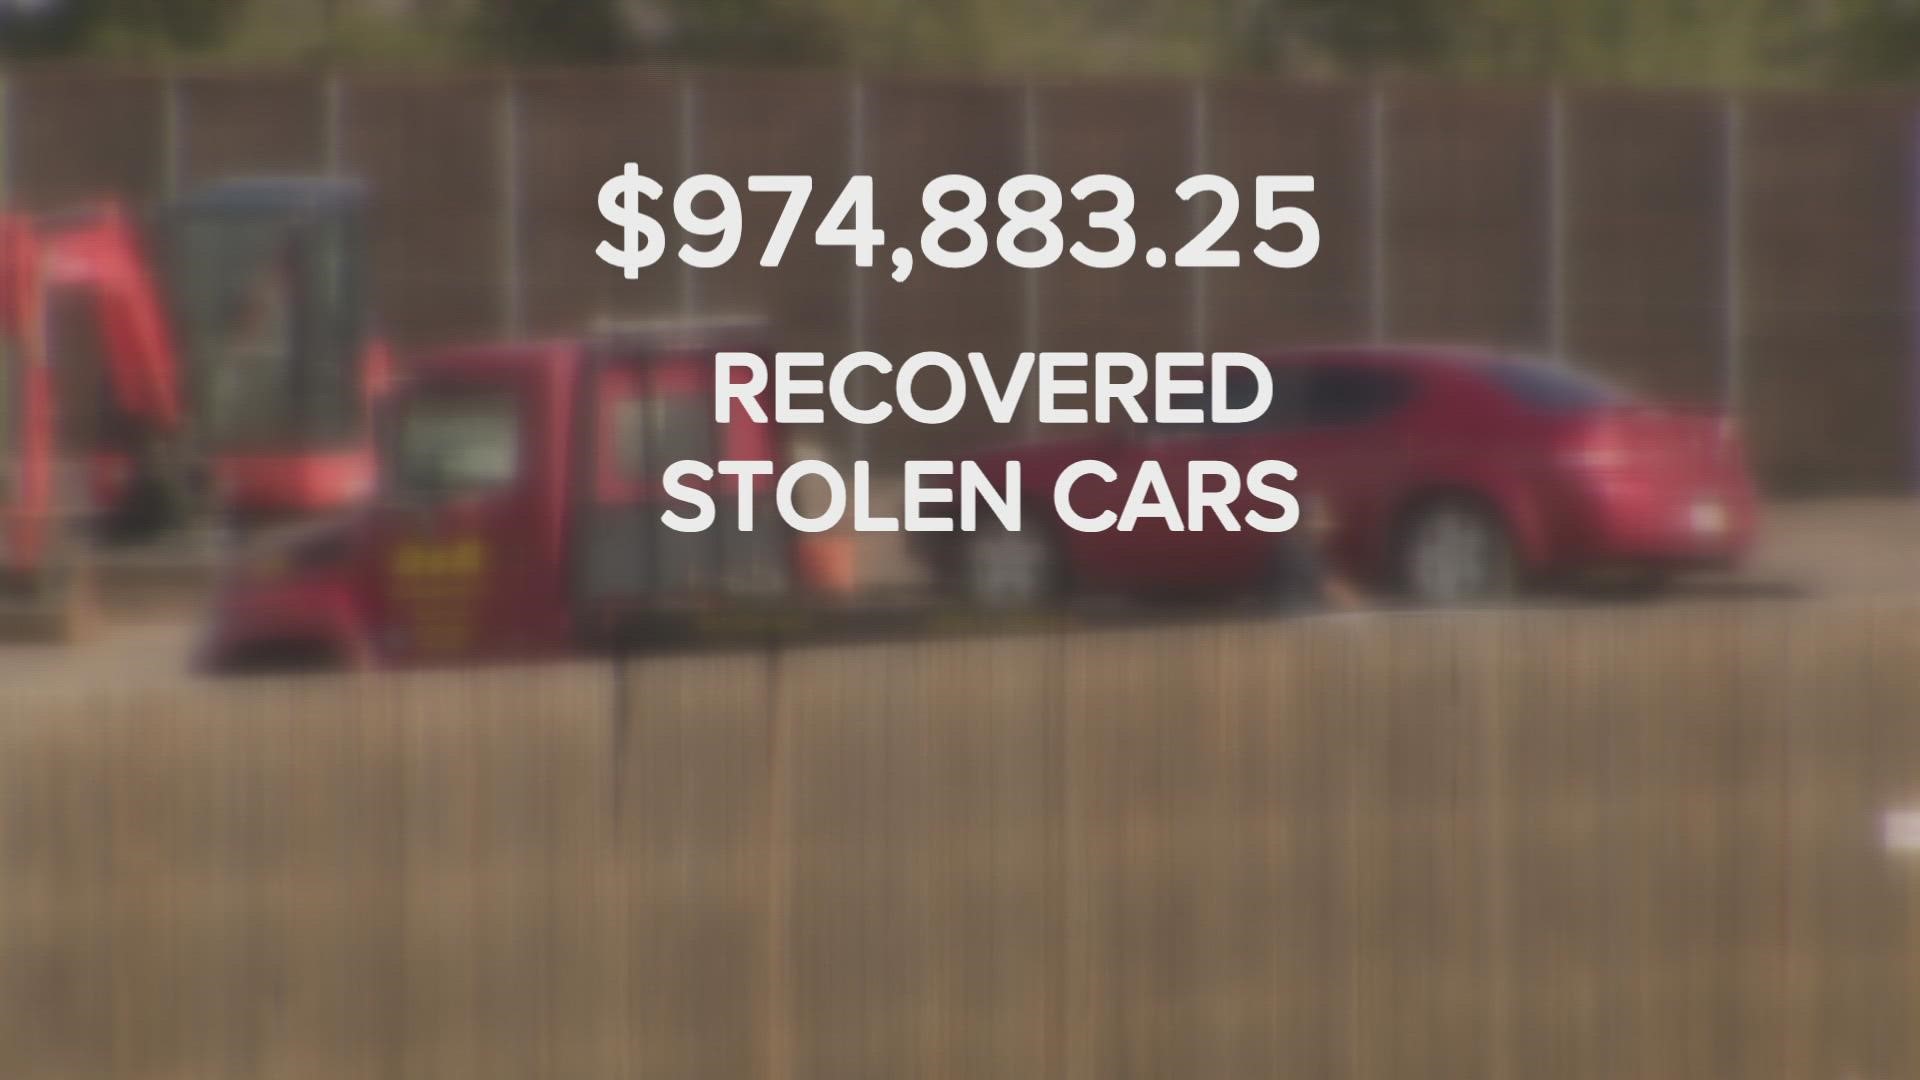 9-news reporter Jon Glasgow looked into what happens if your car gets stolen - and the price you could end up paying to get it back.